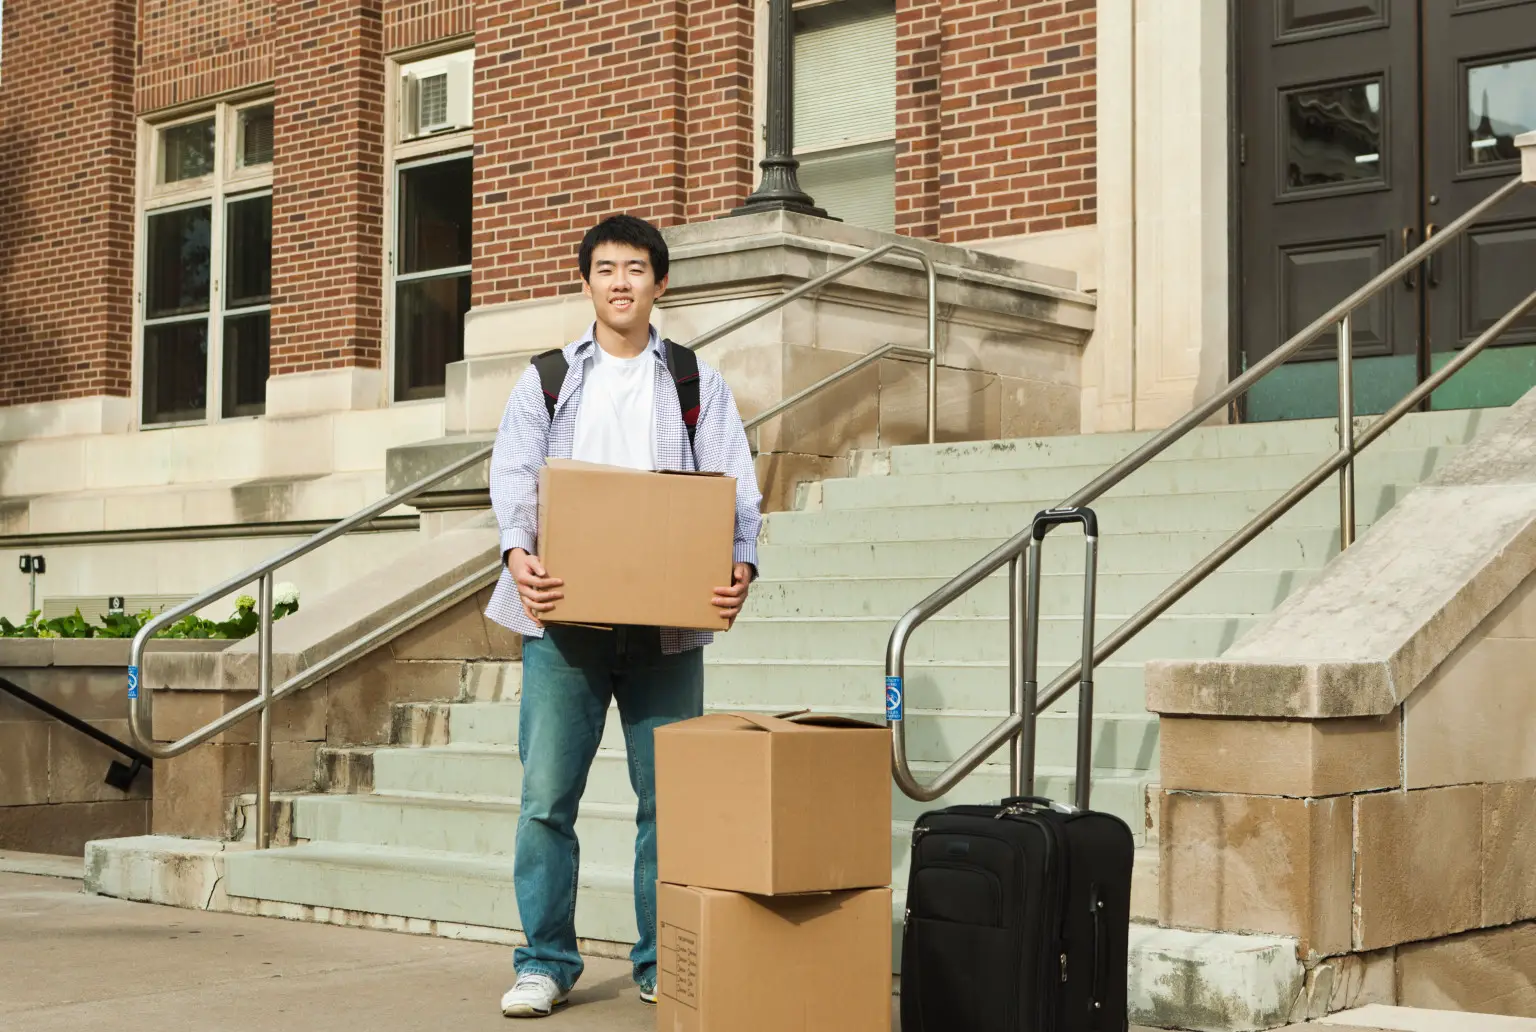 8 Tips for Moving Out of College